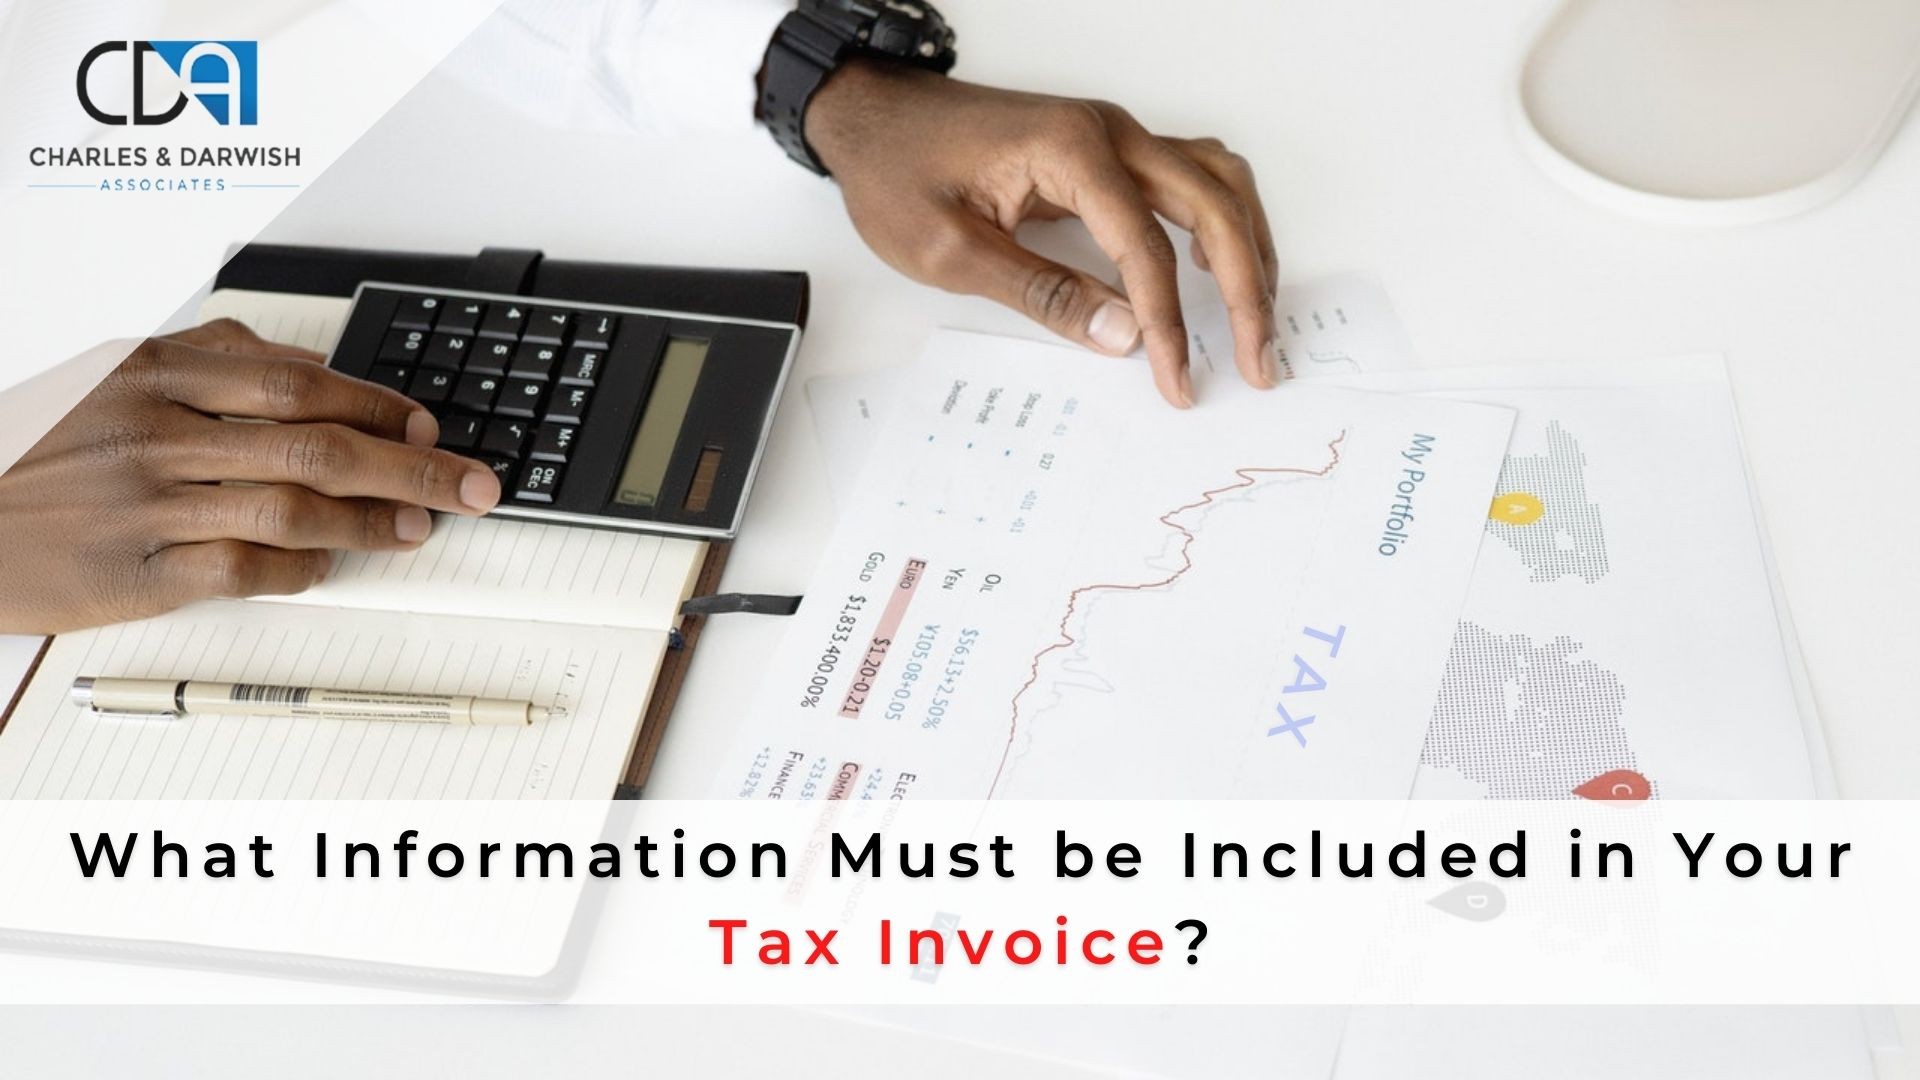 What Information Must be Included in Your Tax Invoice